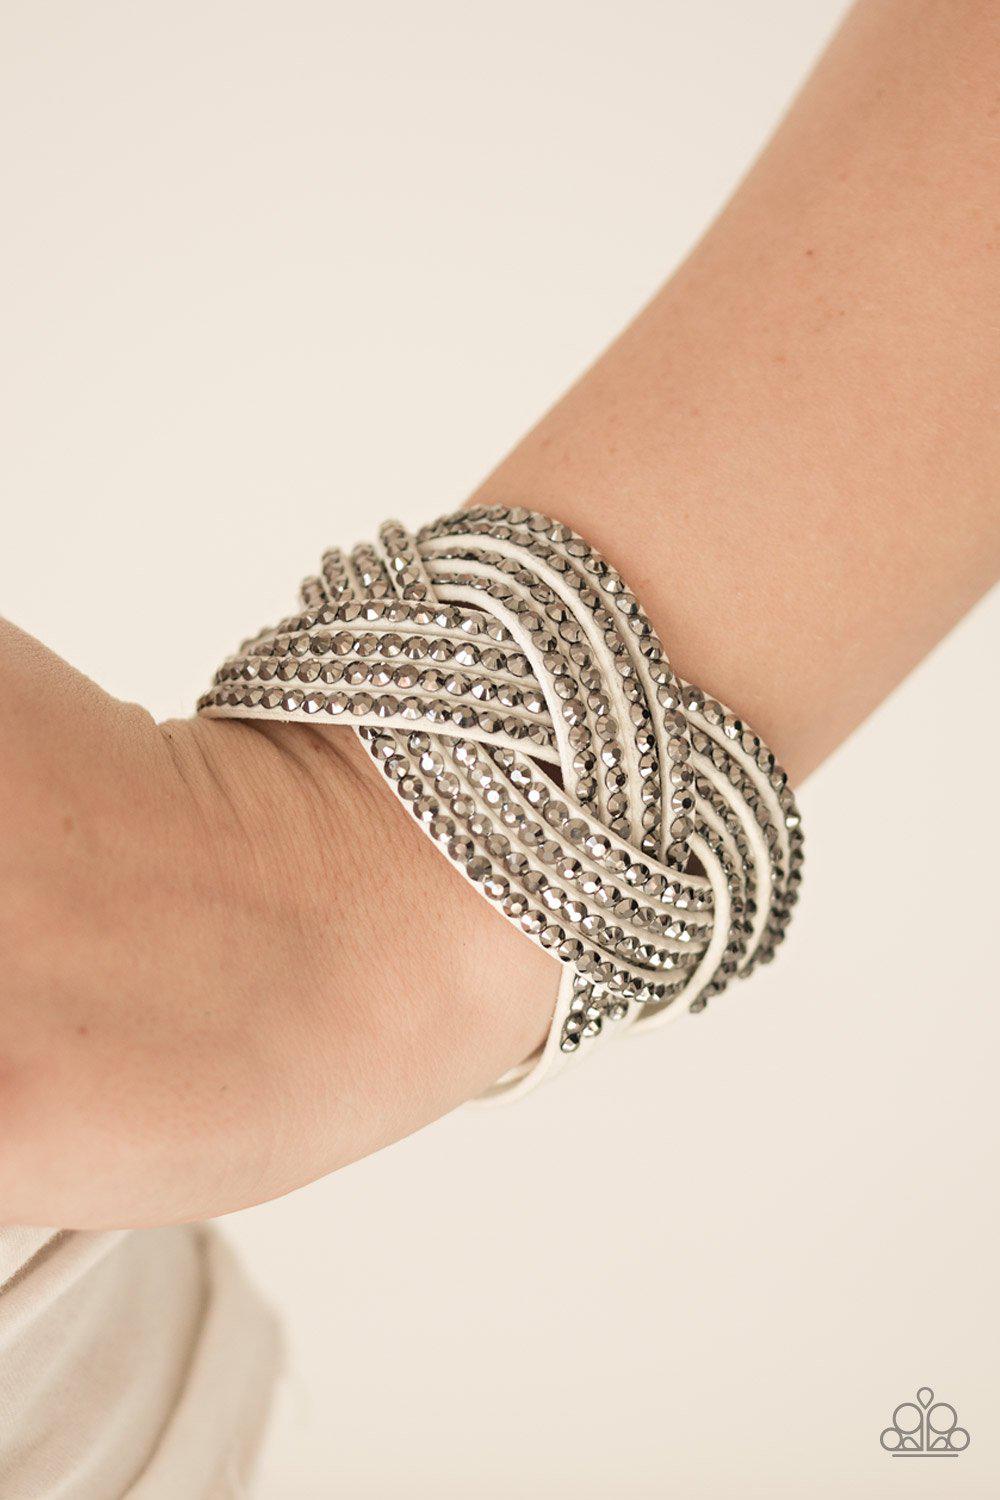 Top Class Chic White and Hematite Braided Urban Wrap Snap Bracelet - Paparazzi Accessories-CarasShop.com - $5 Jewelry by Cara Jewels